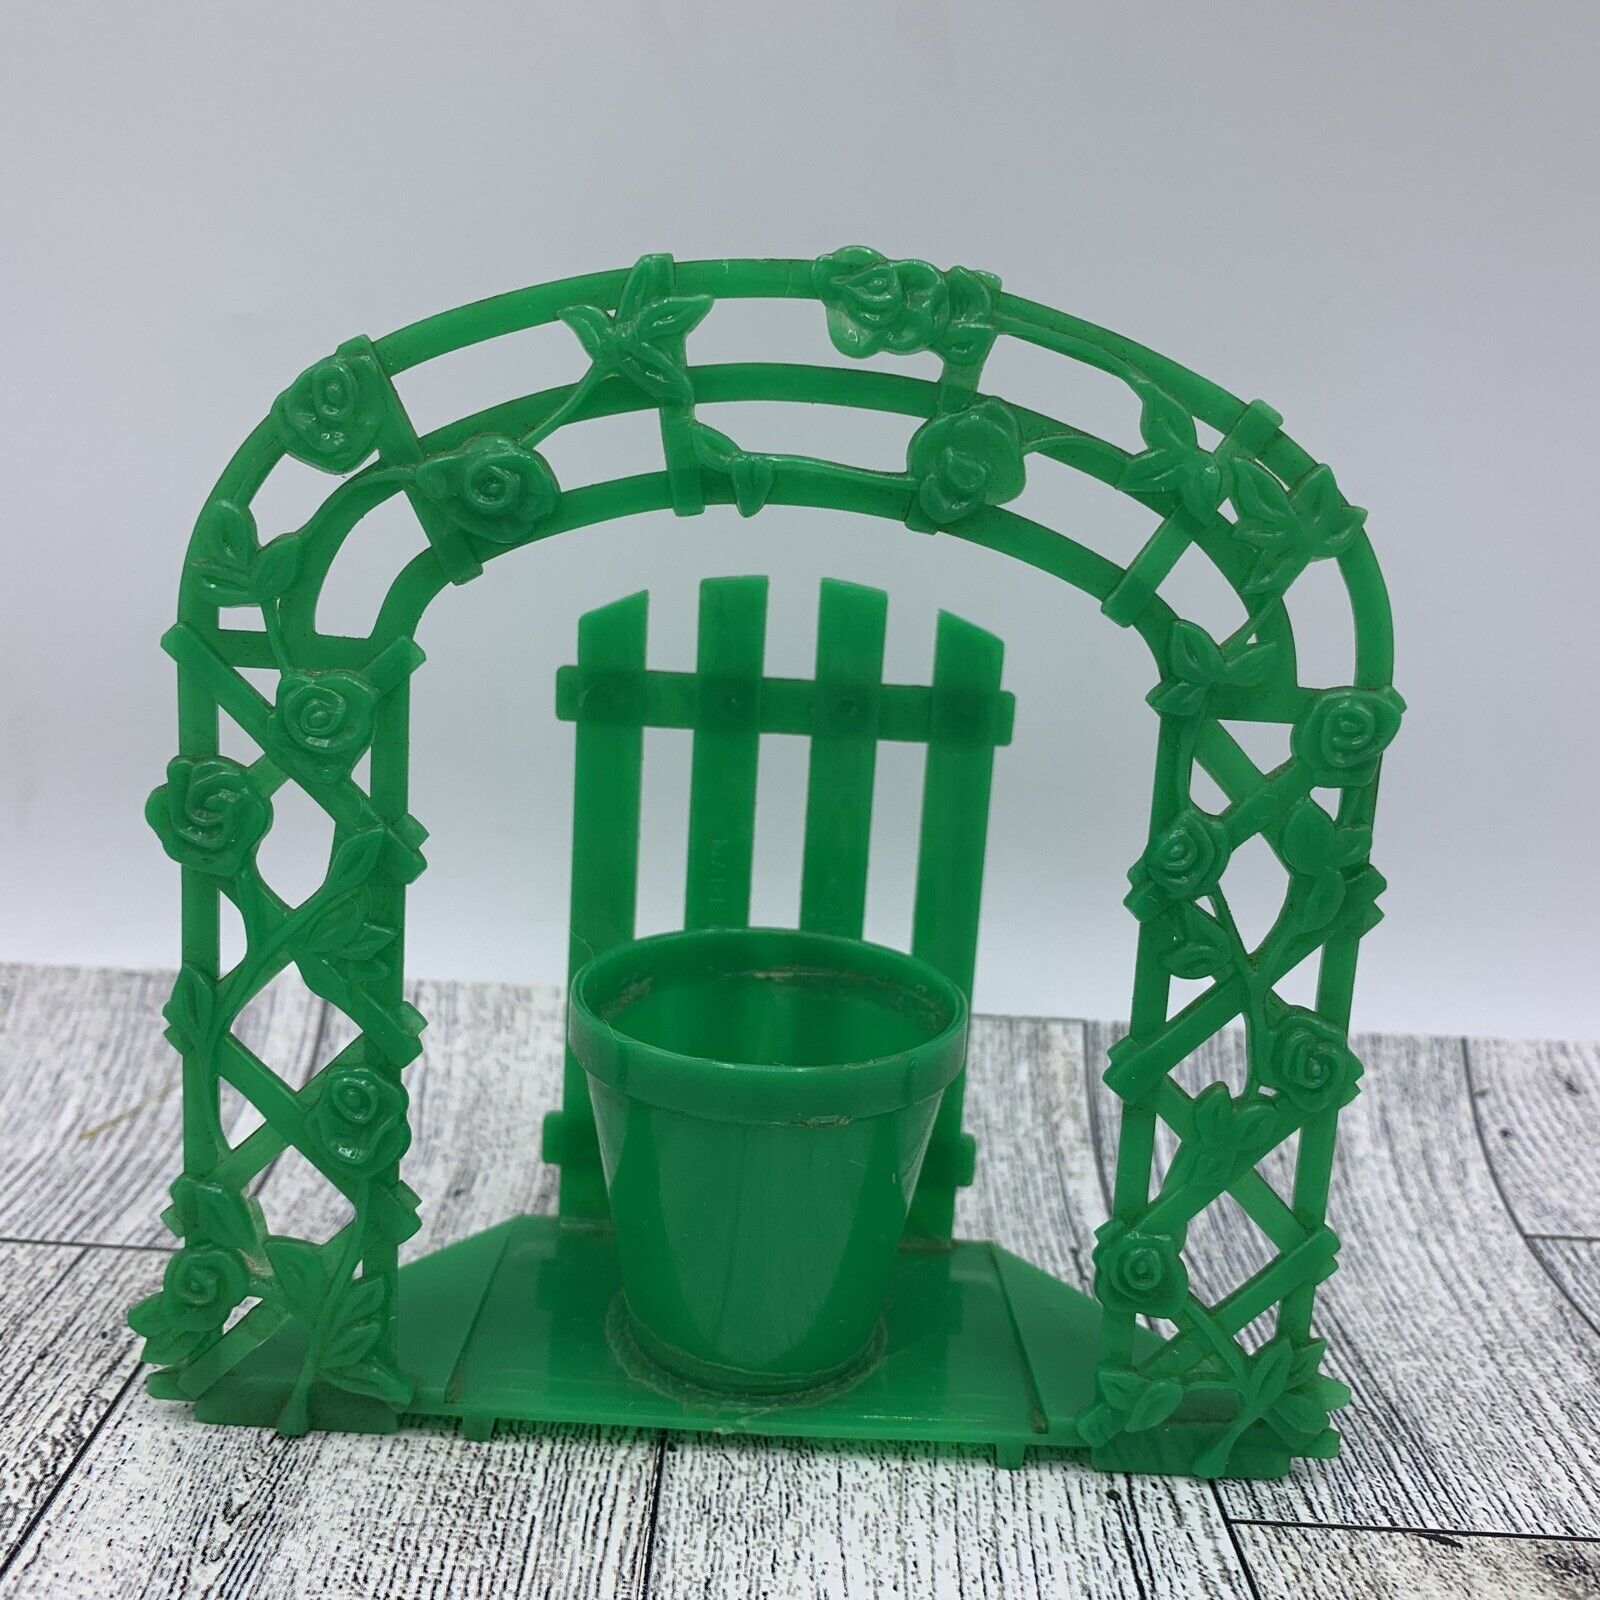 Vintage Toothpick Holder Plastic Green Garden Arch Collectible 70s Table Setting